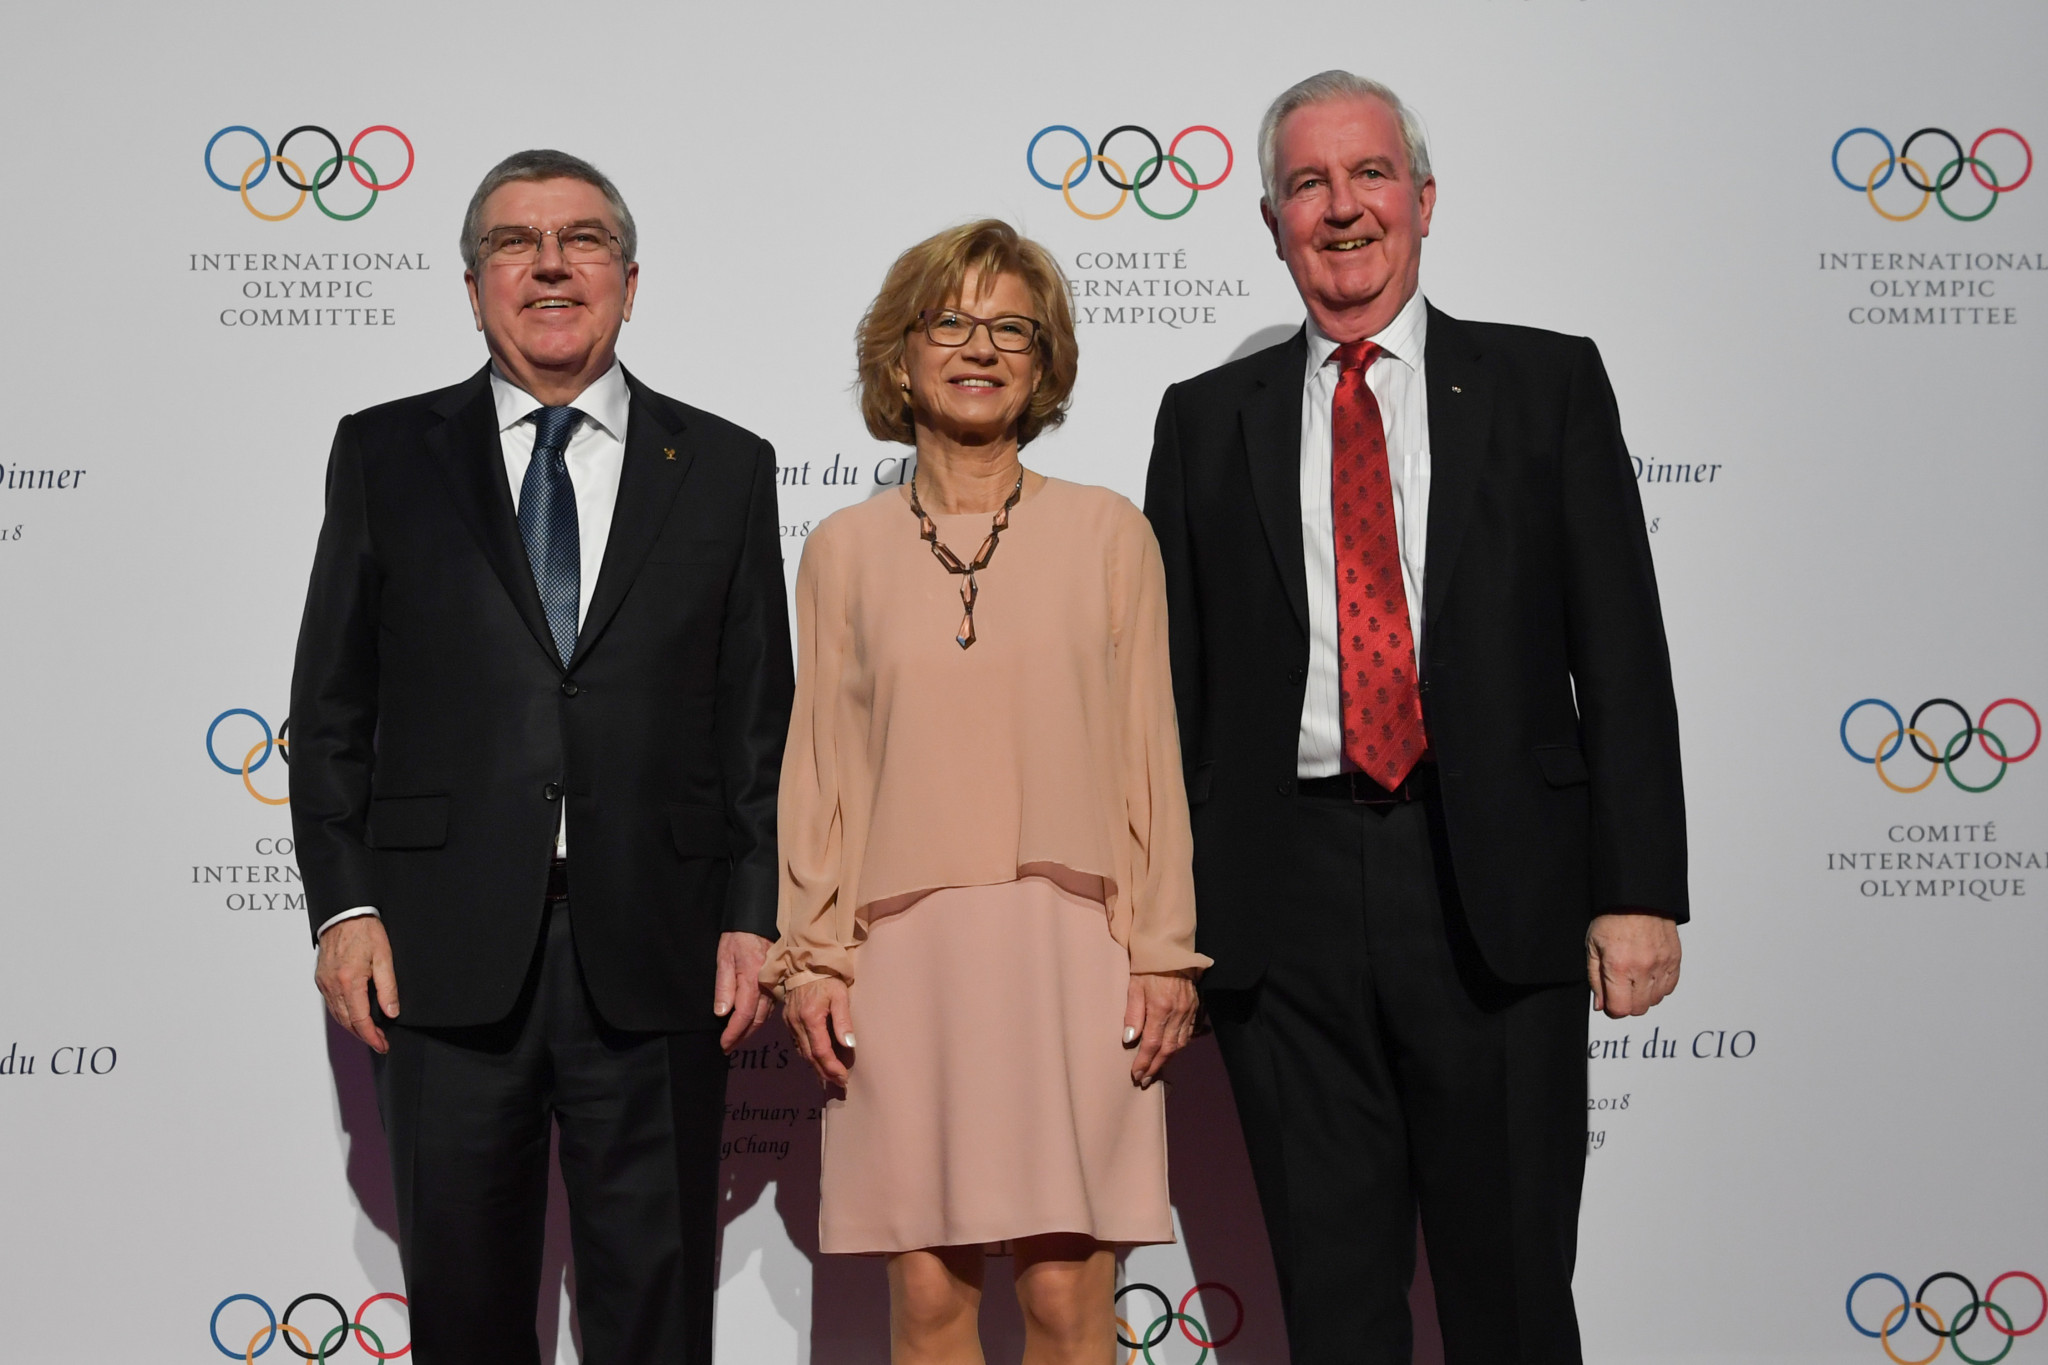 IOC President Thomas Bach and WADA counterpart Sir Craig Reedie are both desperate for the saga to end ©Getty Images